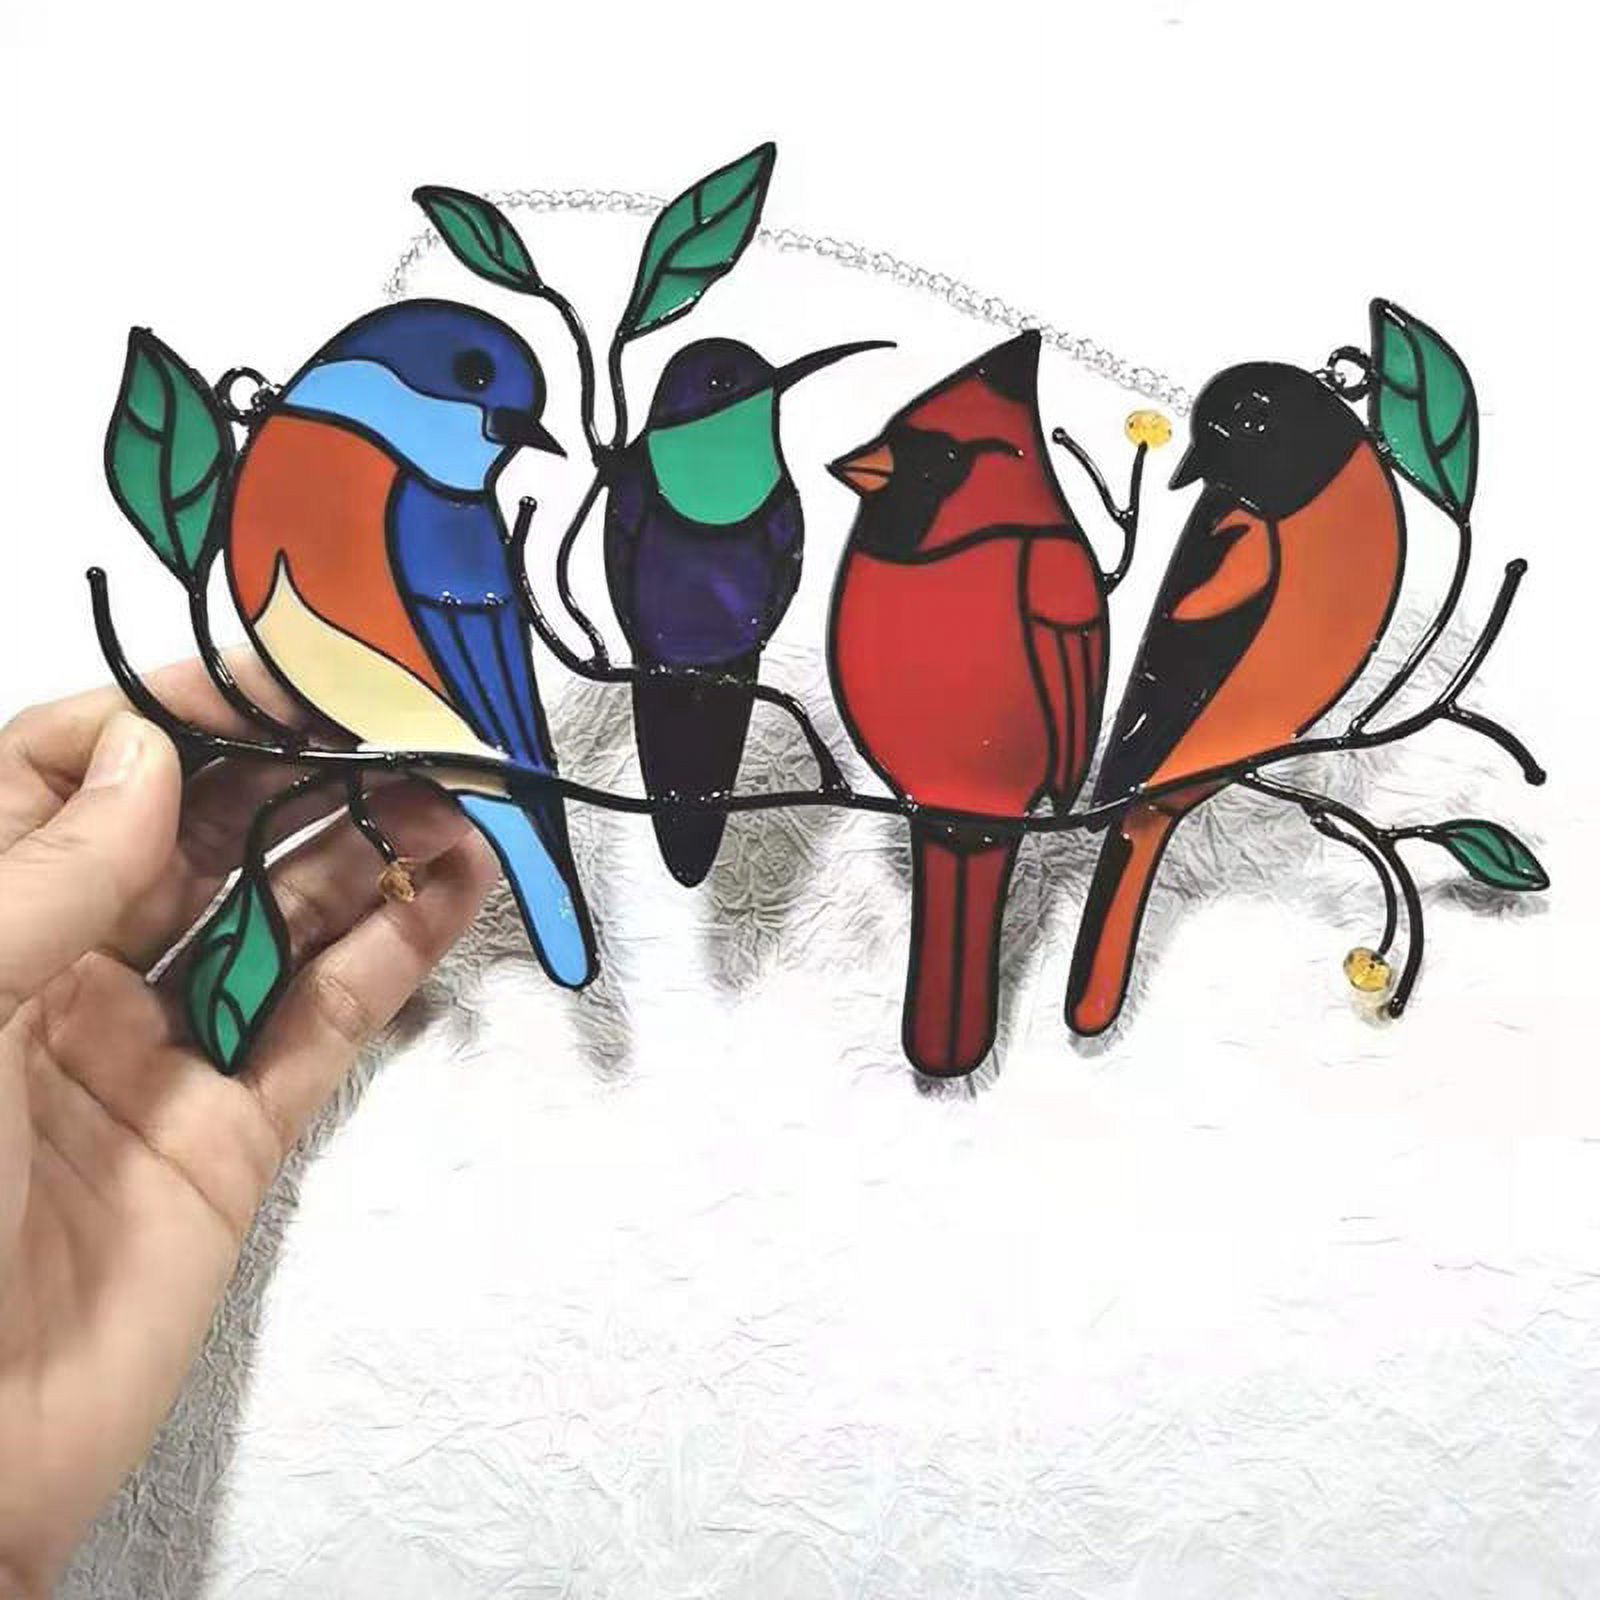 Multicolor Birds On A Wire High Stained Ornament Glass Suncatcher Window Panel,Bird Series Hanging Ornaments Pendant Home Decoration,Home Decor Gifts For Bird 1PC - image 4 of 10